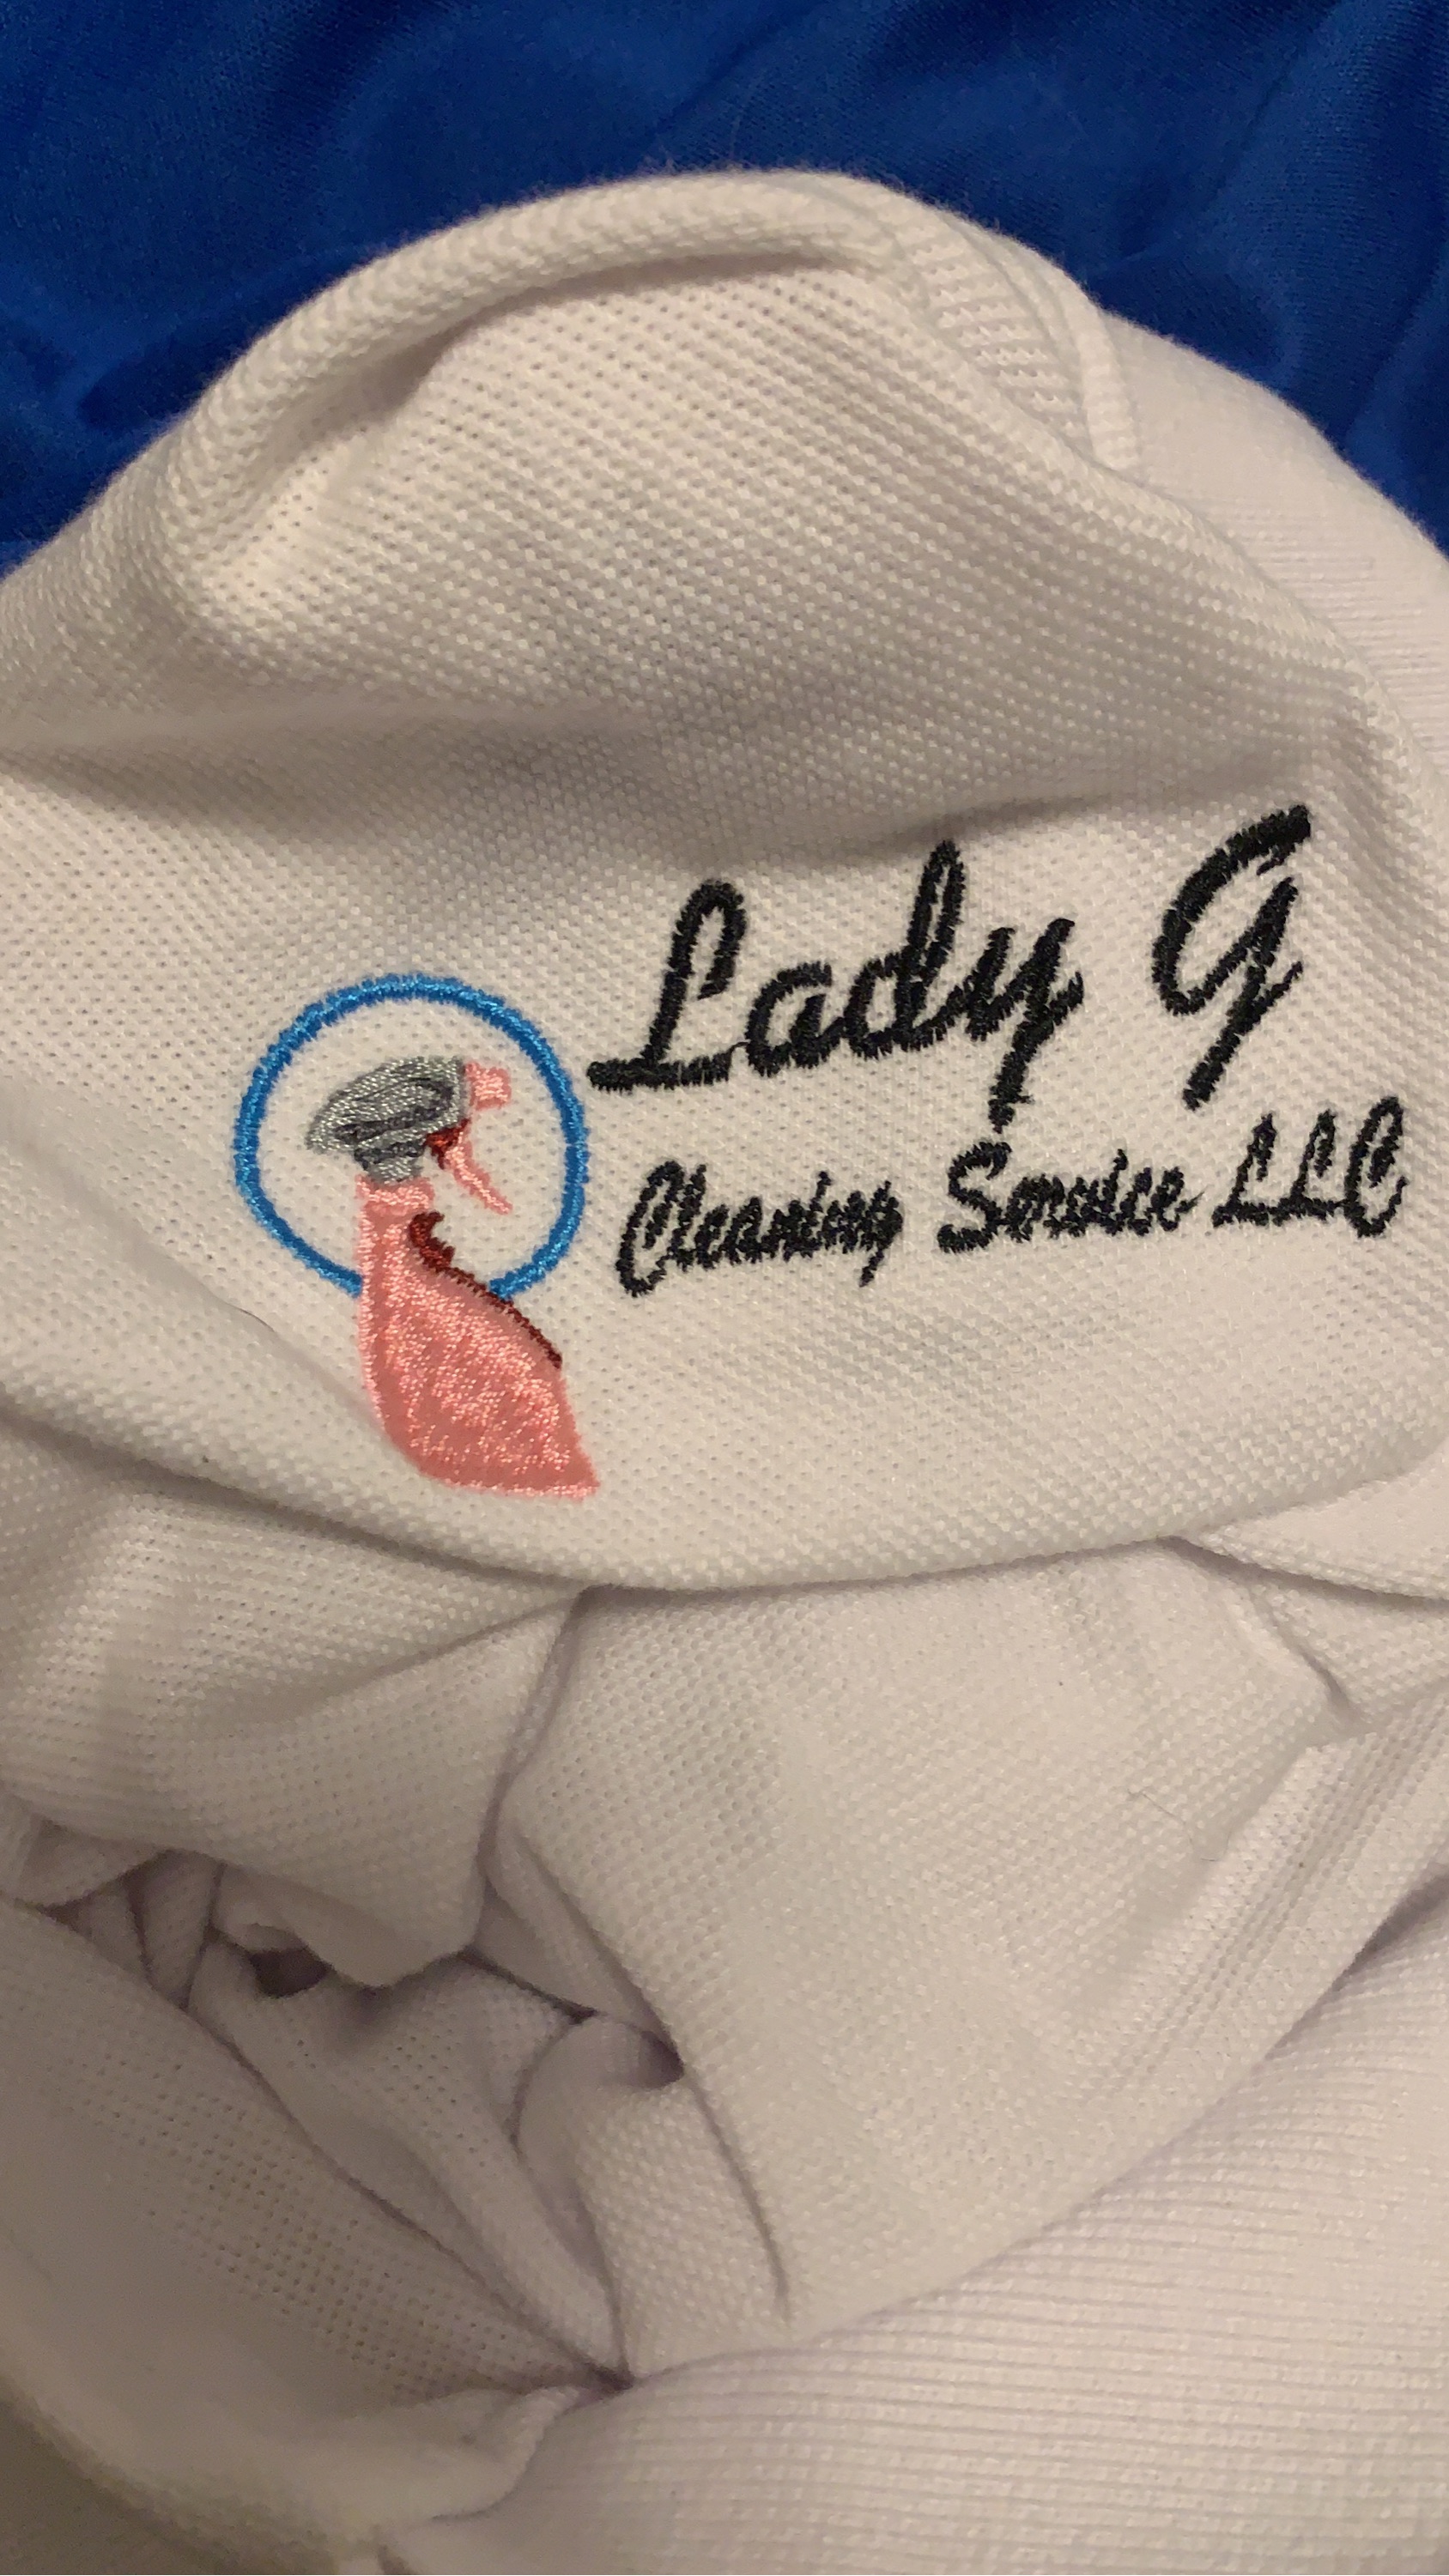 Lady G Cleaning Service Logo